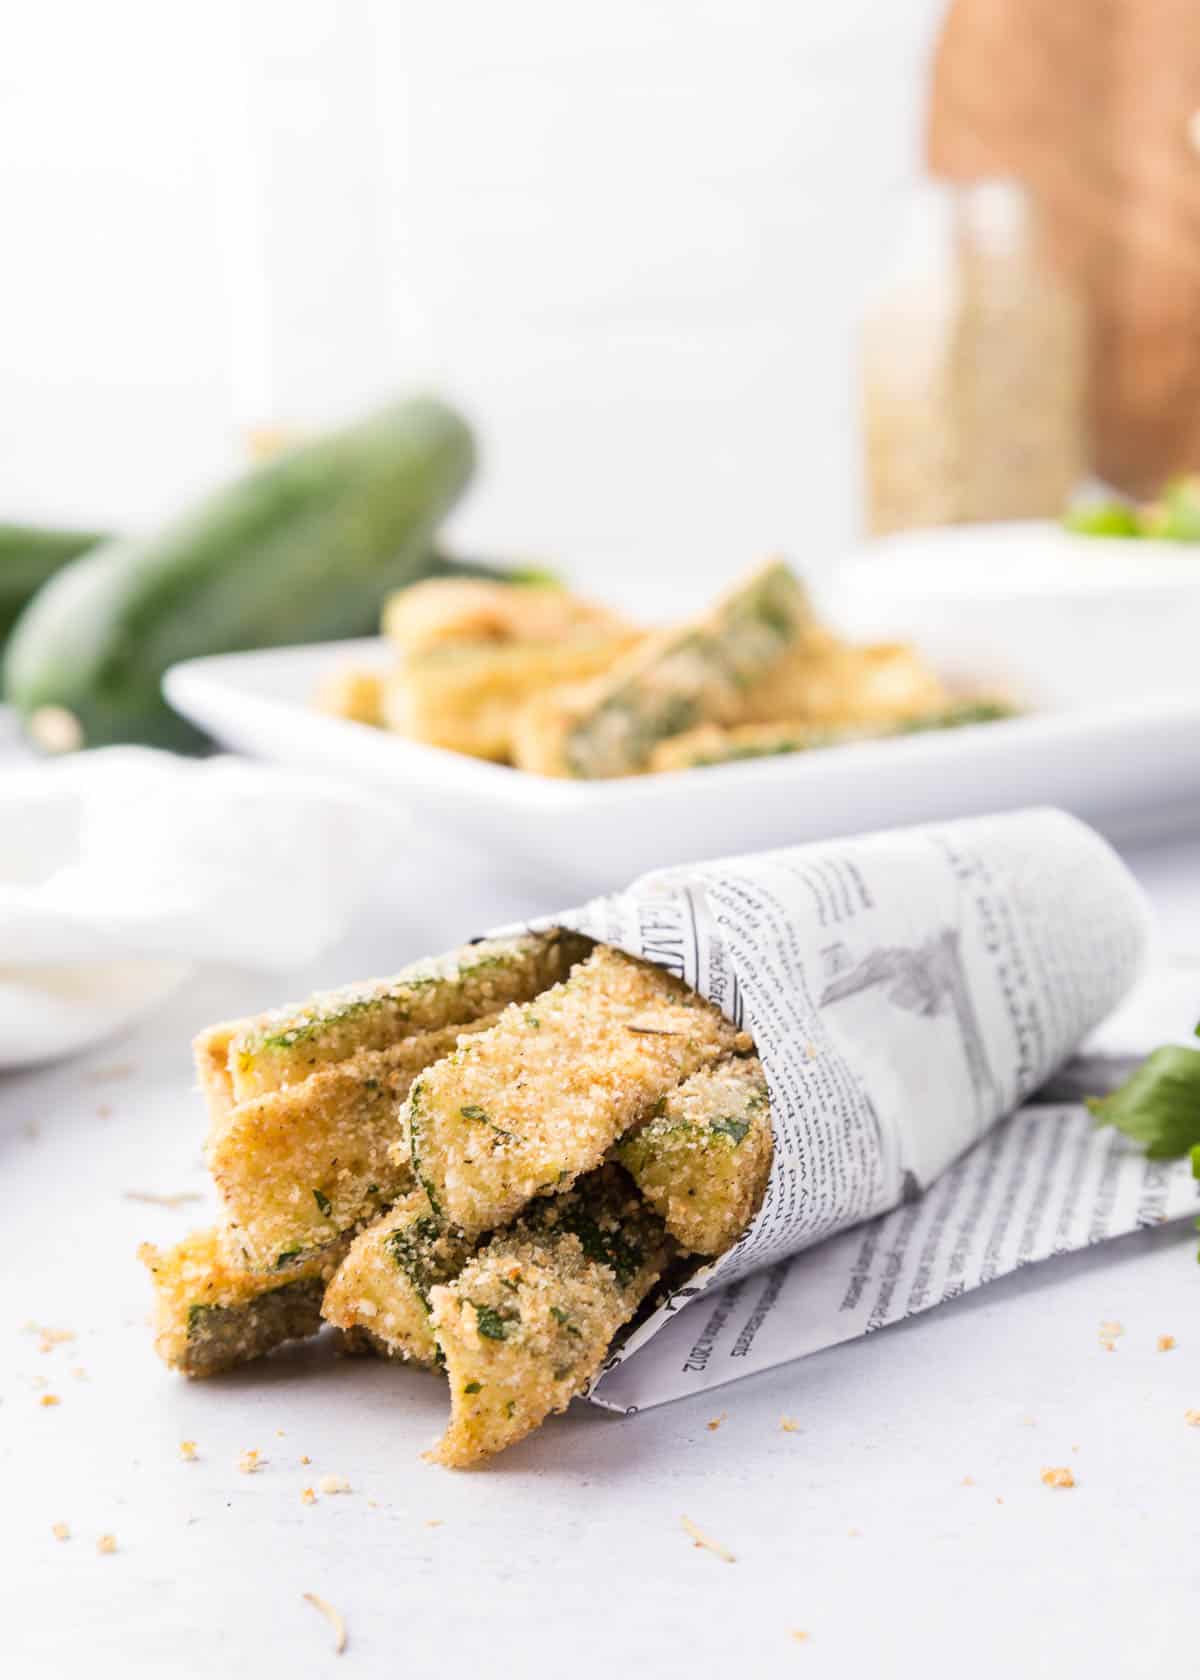 Parmesan zucchini fries wrapped in printed paper.